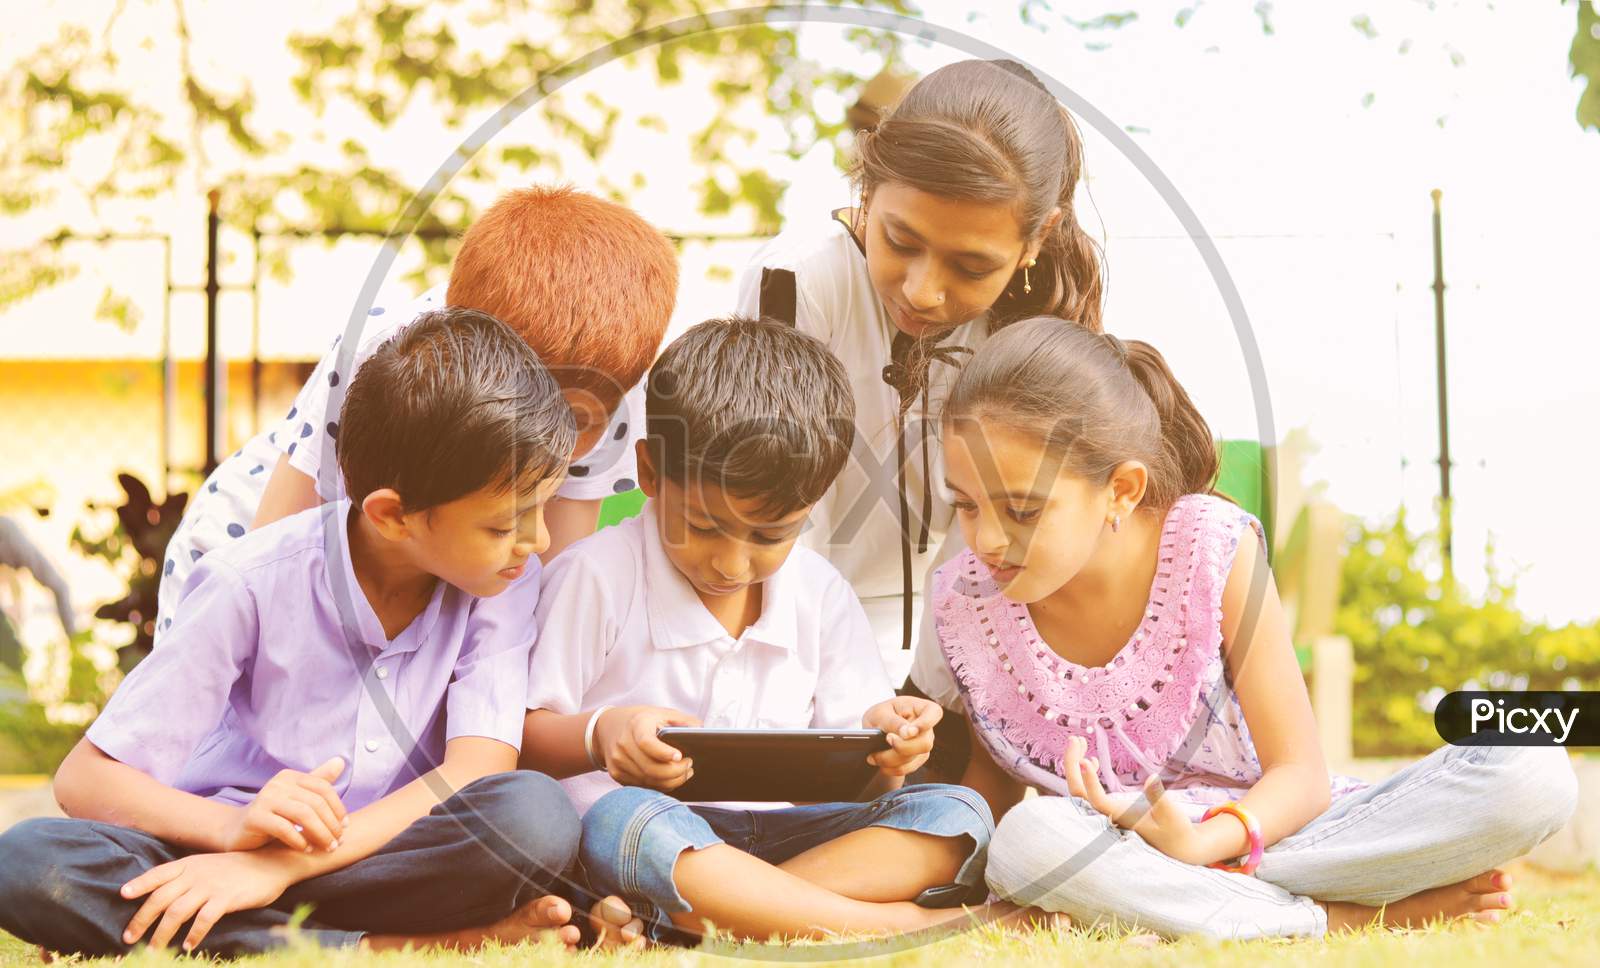 Group of Children using a Mobile or Smartphone in a Park or Outdoors